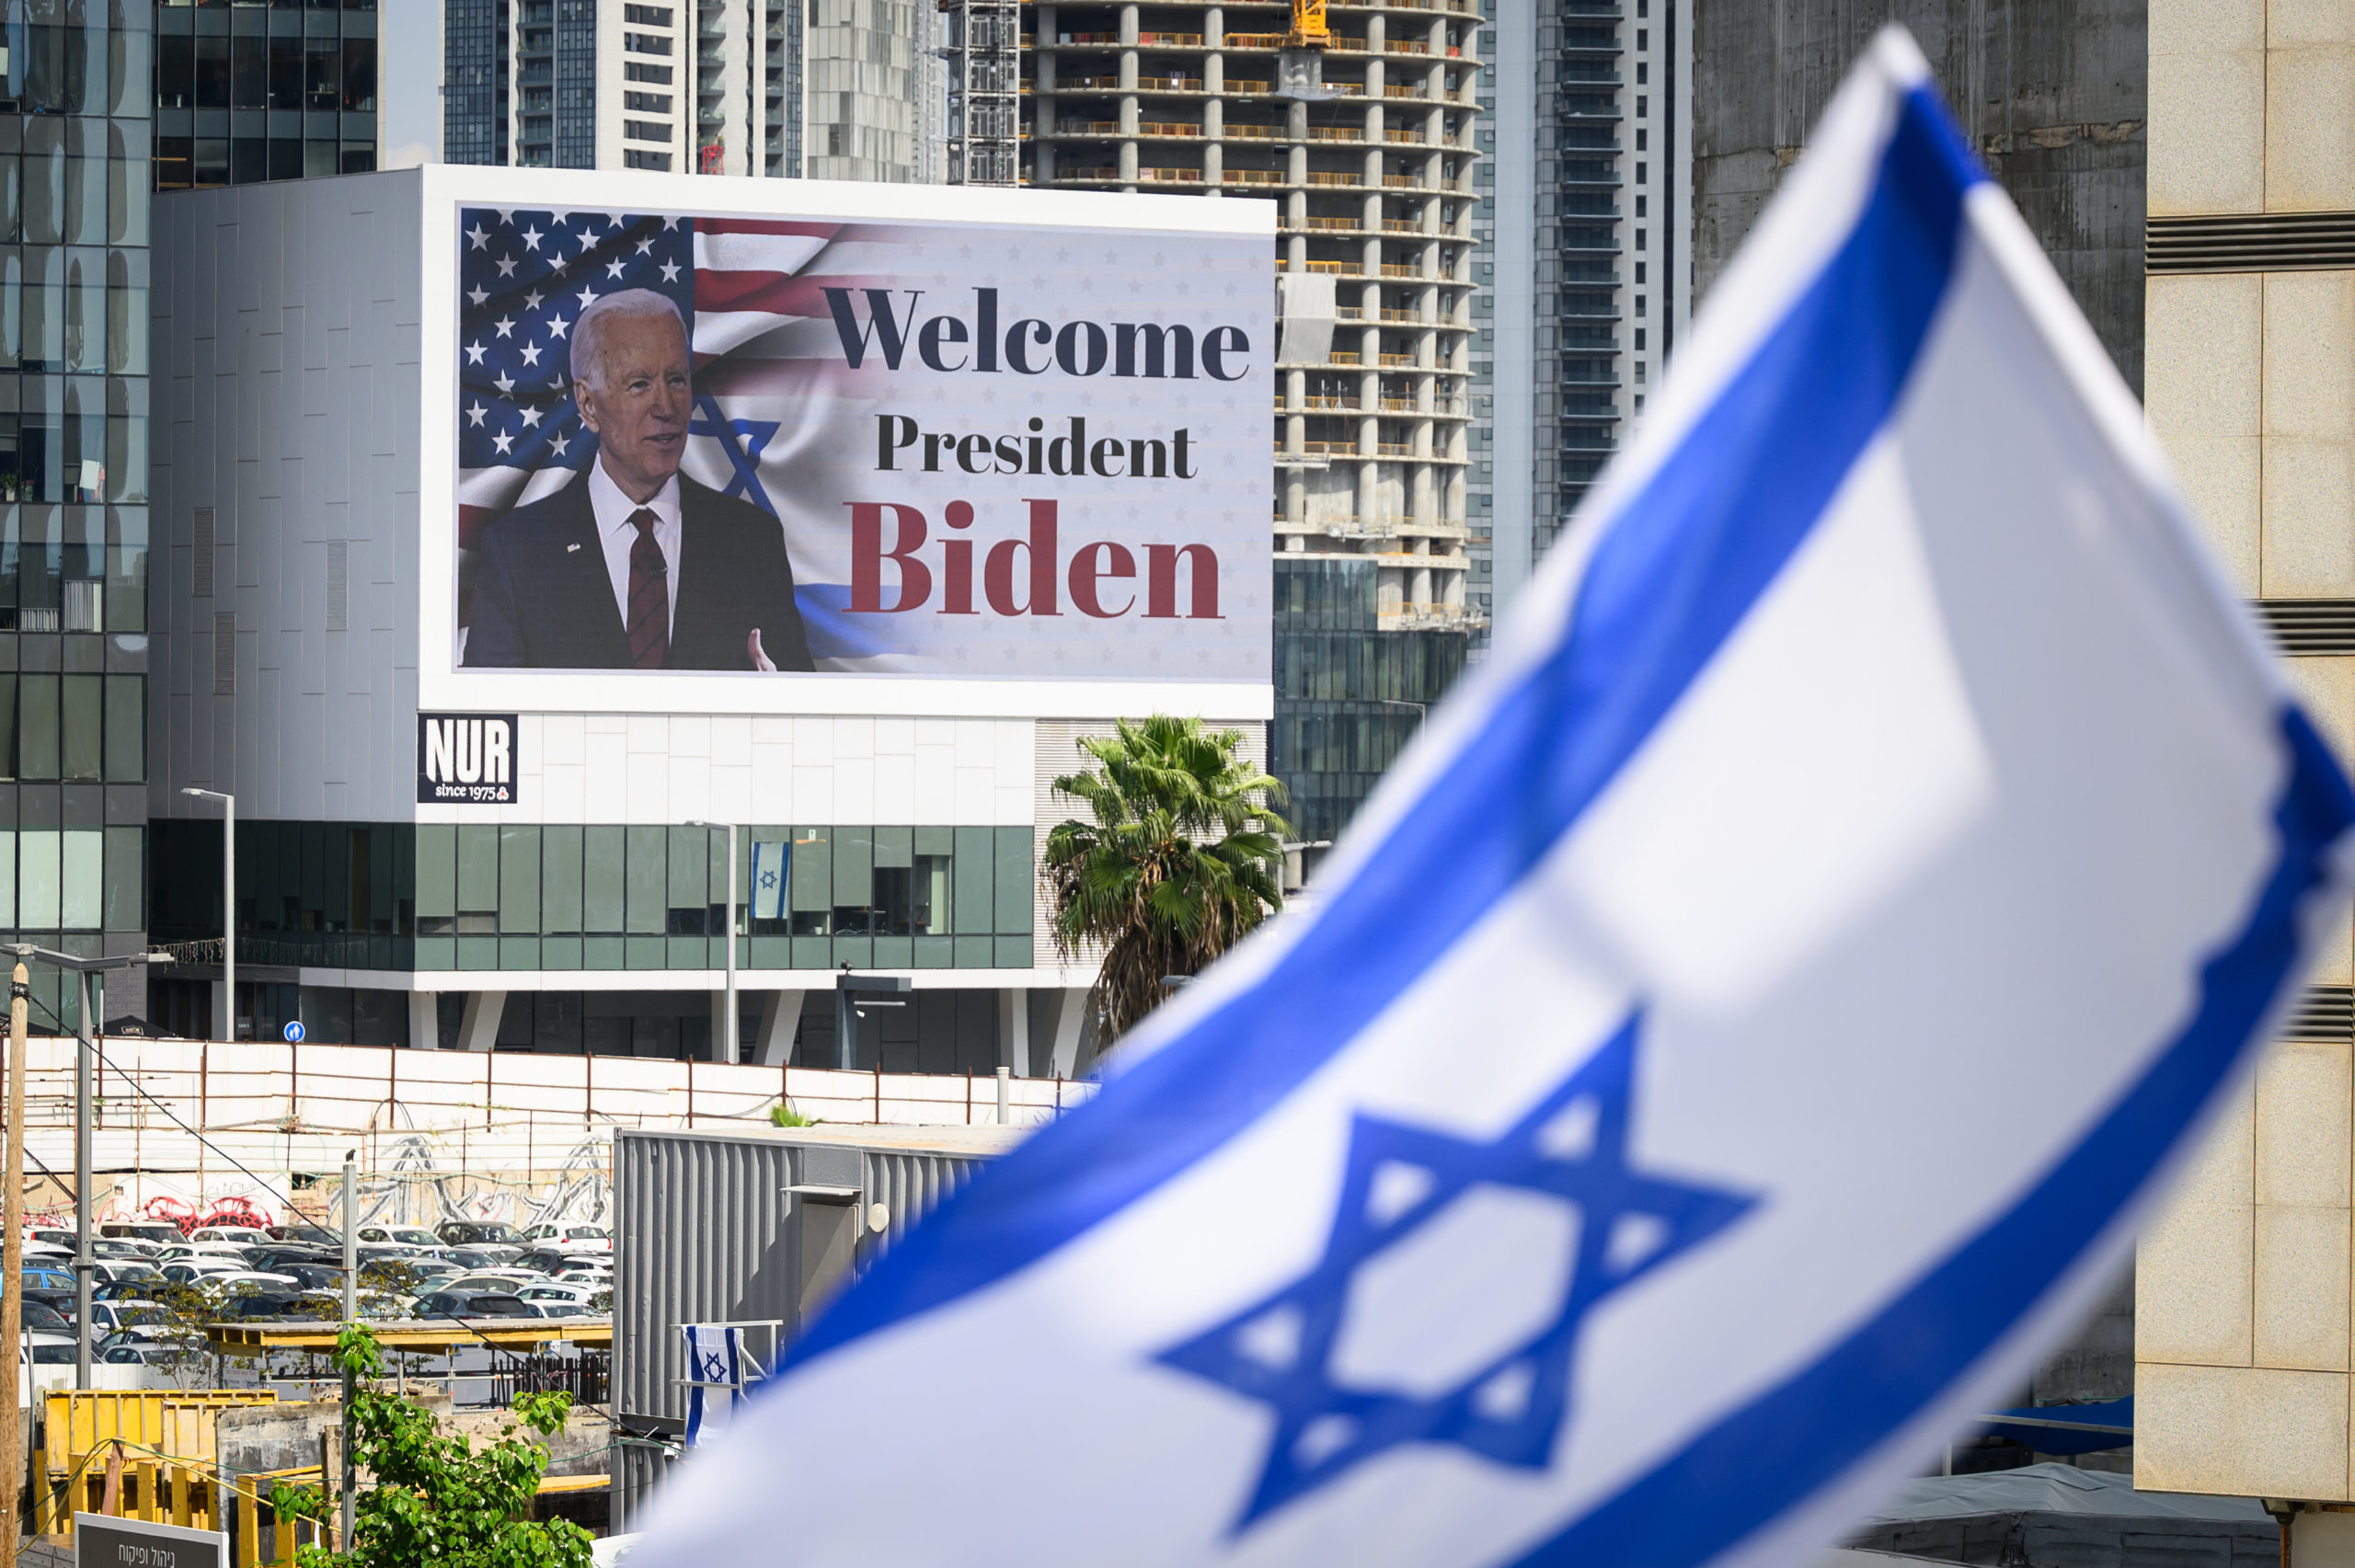 A digital billboard welcomes US President Joe Biden to Israel on October 18, 2023 in Tel Aviv, Israel. President Biden will meet with Prime Minister Benjamin Netanyahu, as well with President Isaac Herzog, and with the families of the hostages taken by Hamas. Jordan cancelled a visit with Biden that was supposed to happen after he left Israel. As Israel prepares to invade the Gaza Strip in its campaign to vanquish Hamas, the Palestinian militant group Hamas who launched a deadly attack in southern Israel on October 7th, worries are growing of a wider war with multiple fronts, including at the country's northern border with Lebanon. Countries have scrambled to evacuate their citizens from Israel, and Israel has begun relocating some communities on its northern border. (Photo by Leon Neal/Getty Images)